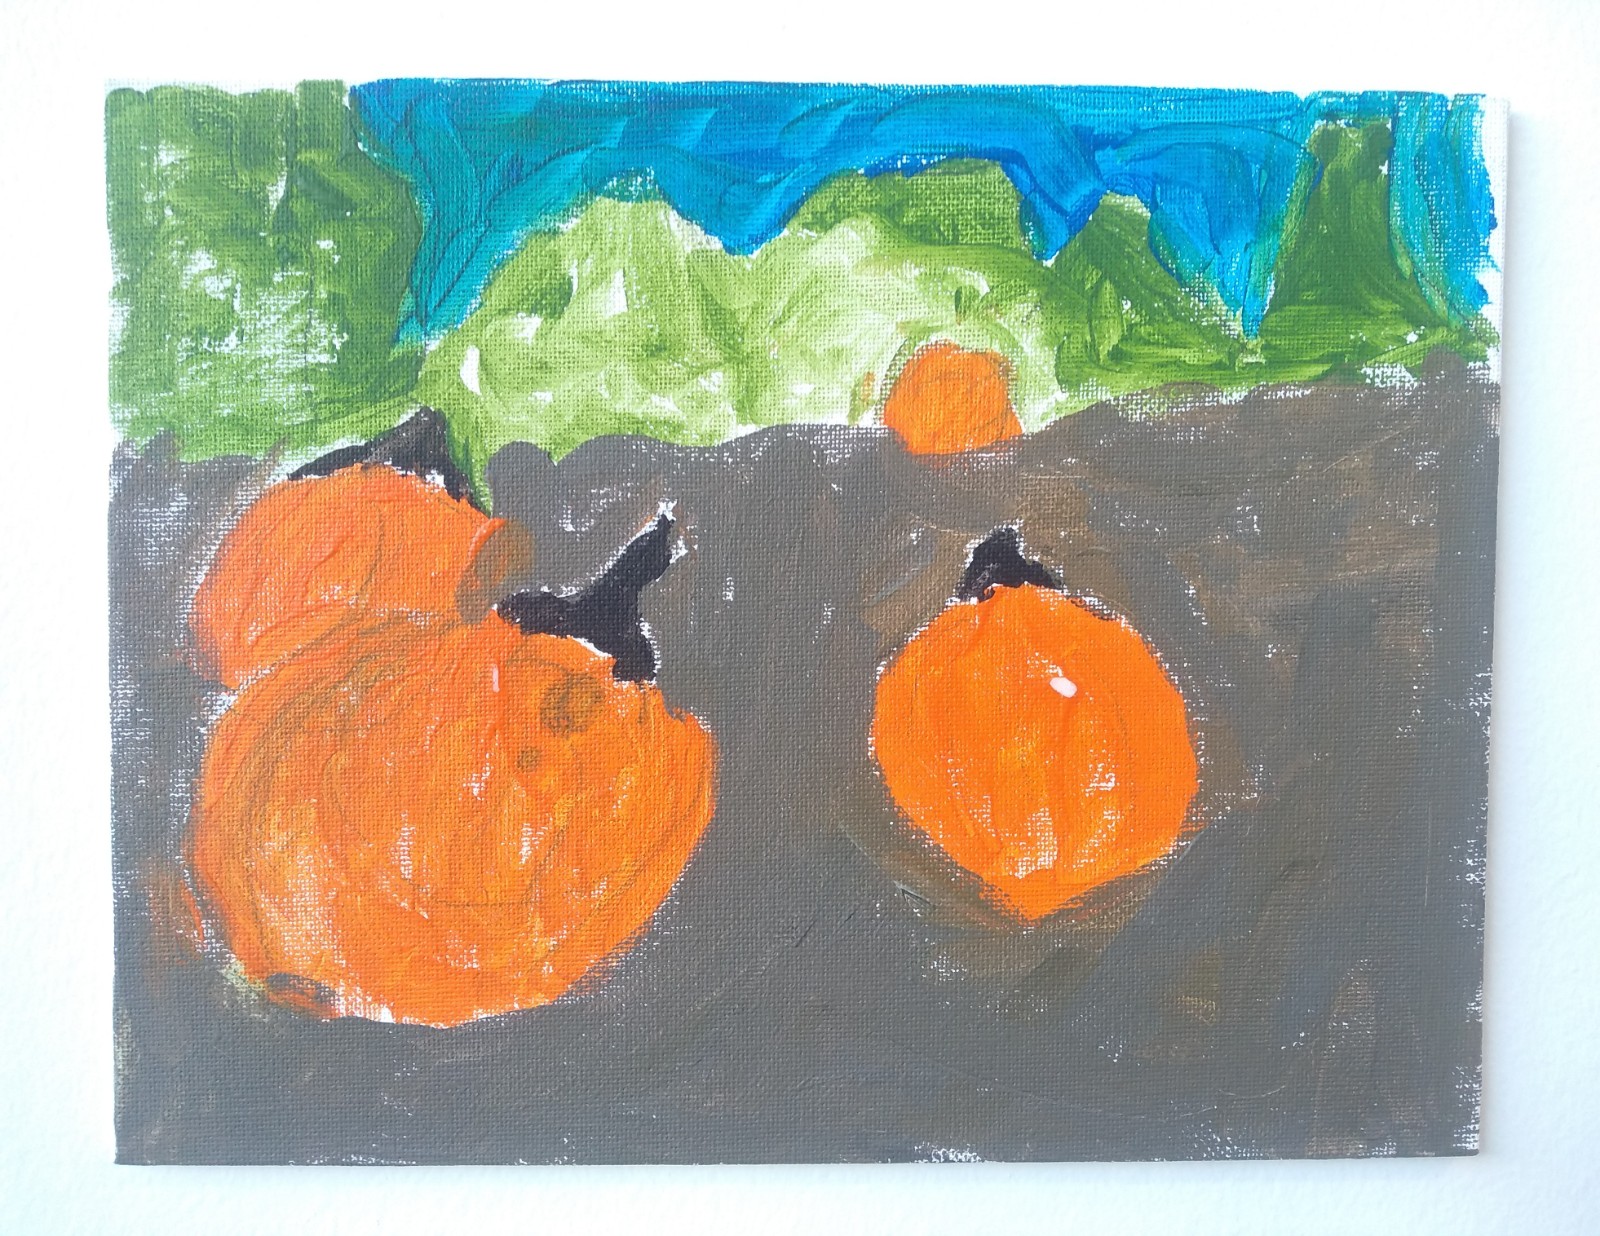 Three pumpkins in an orchard with green trees in the back.